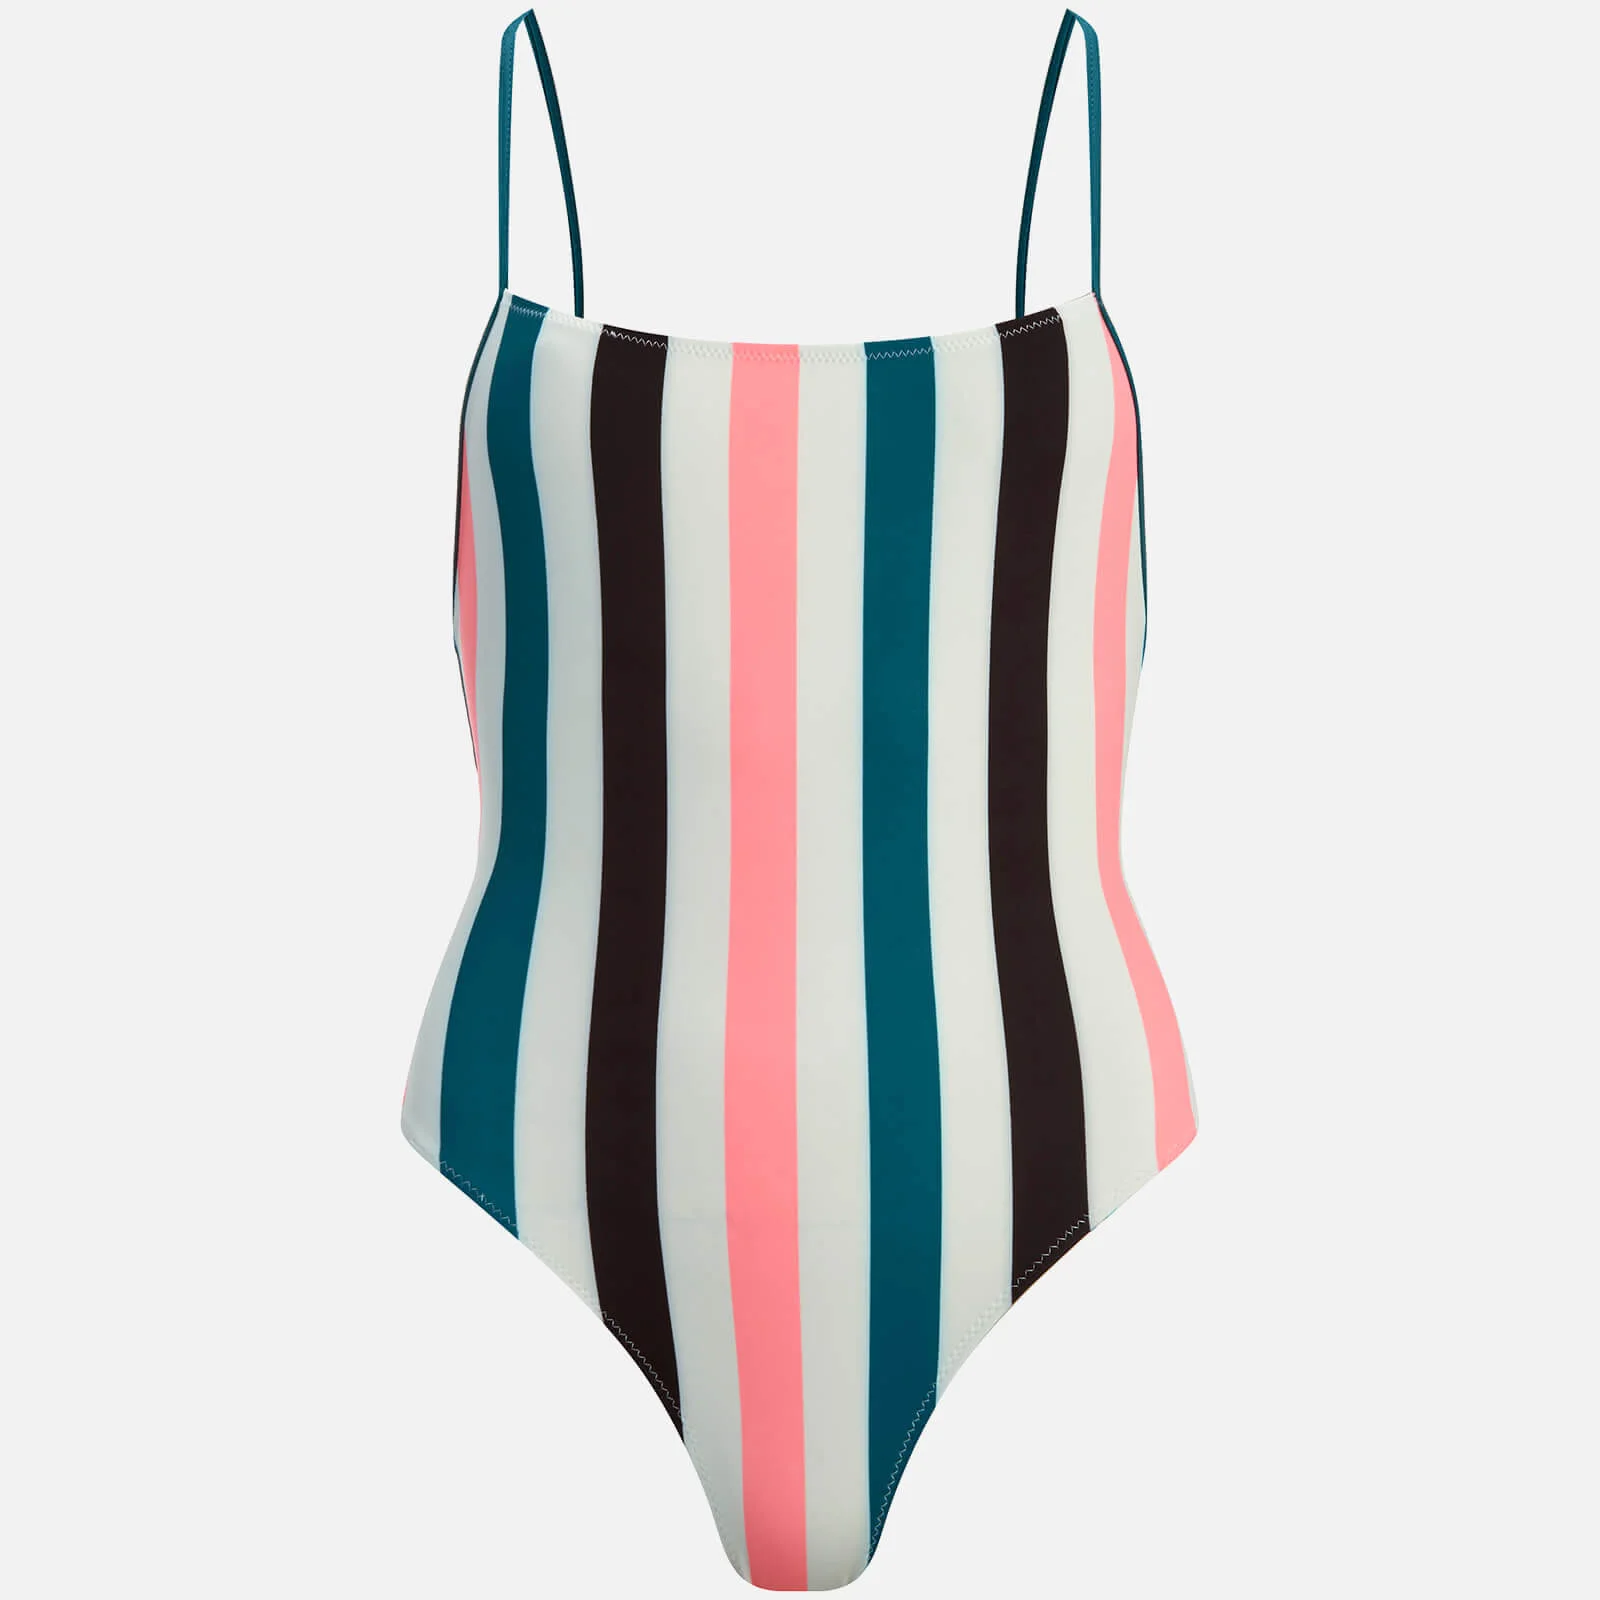 Solid & Striped Women's The Chelsea Swimsuit - Black Jade/Coral Stripe Image 1